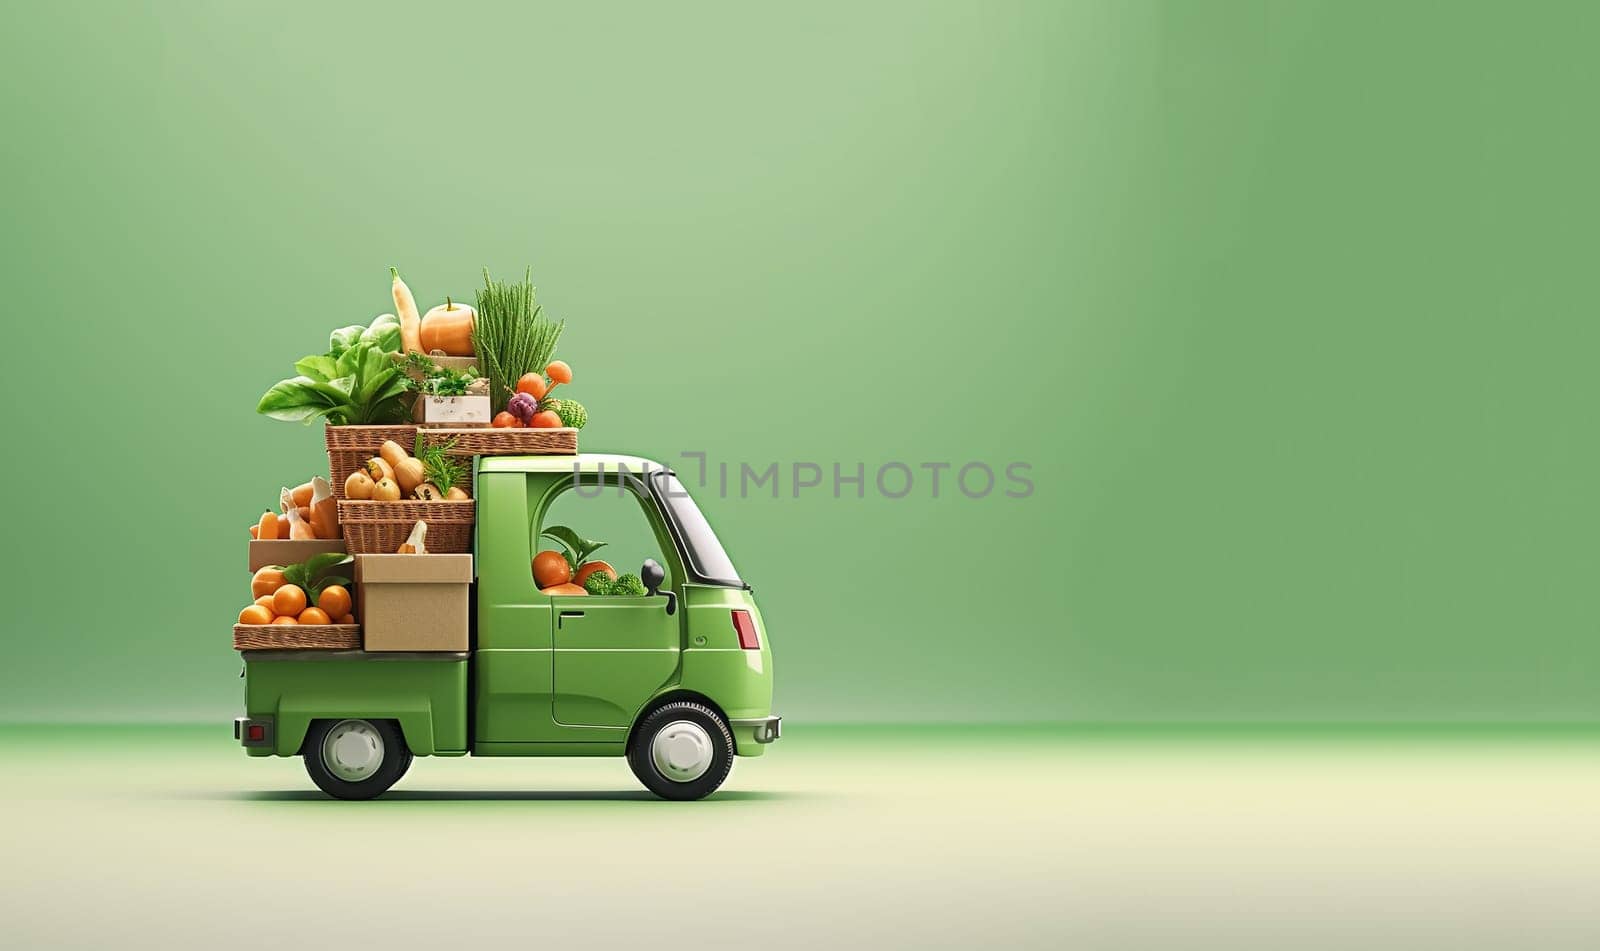 Fast delivery service car driving with order business background concept. Home delivery fresh vegetables in basket. food delivery service. woman accepting groceries box. by Annebel146